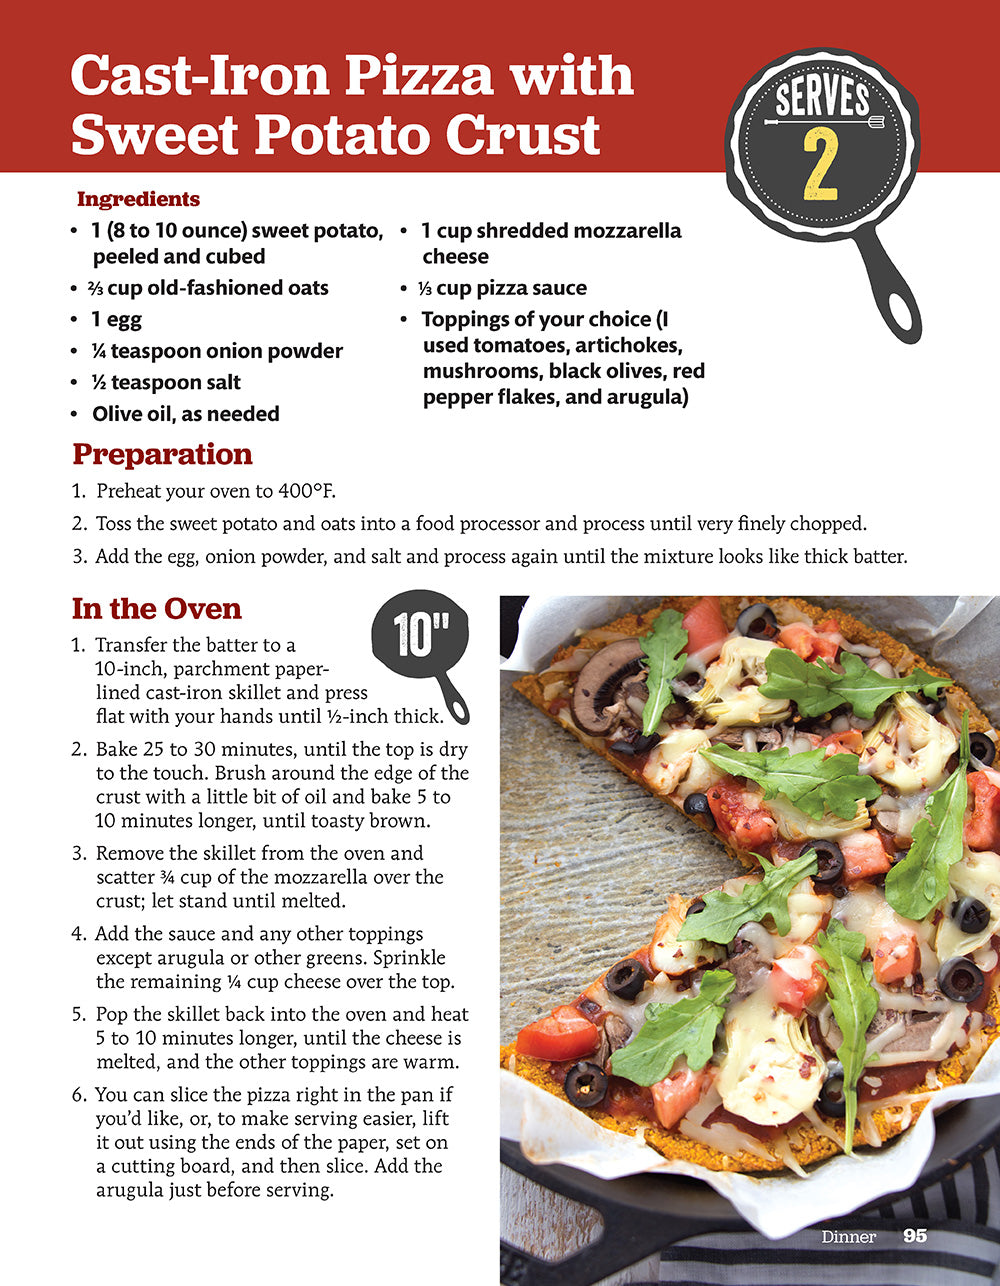 Beef Taco Cast Iron Pizza - Charlotte Shares